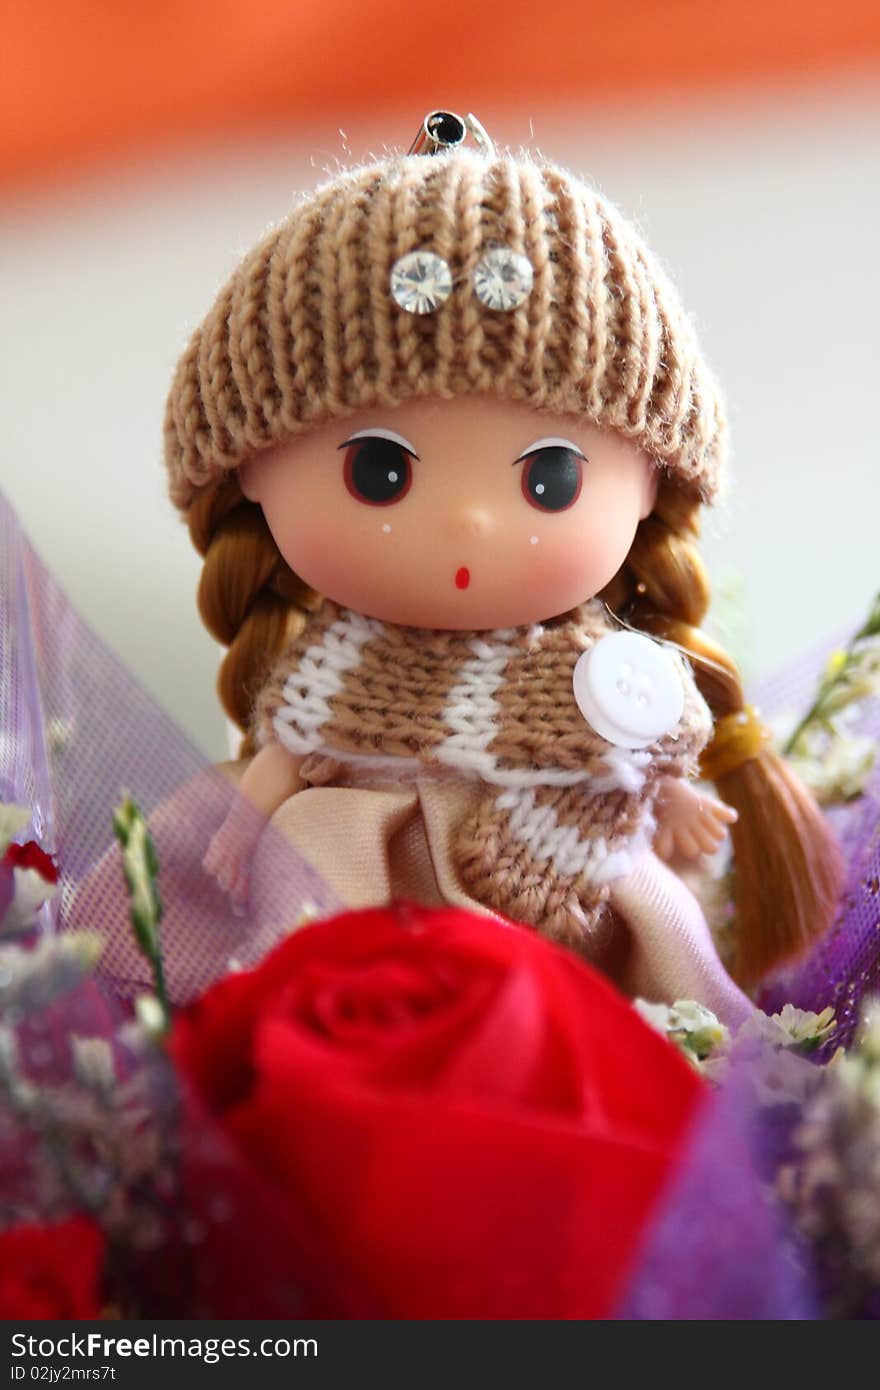 Rose and doll for my love